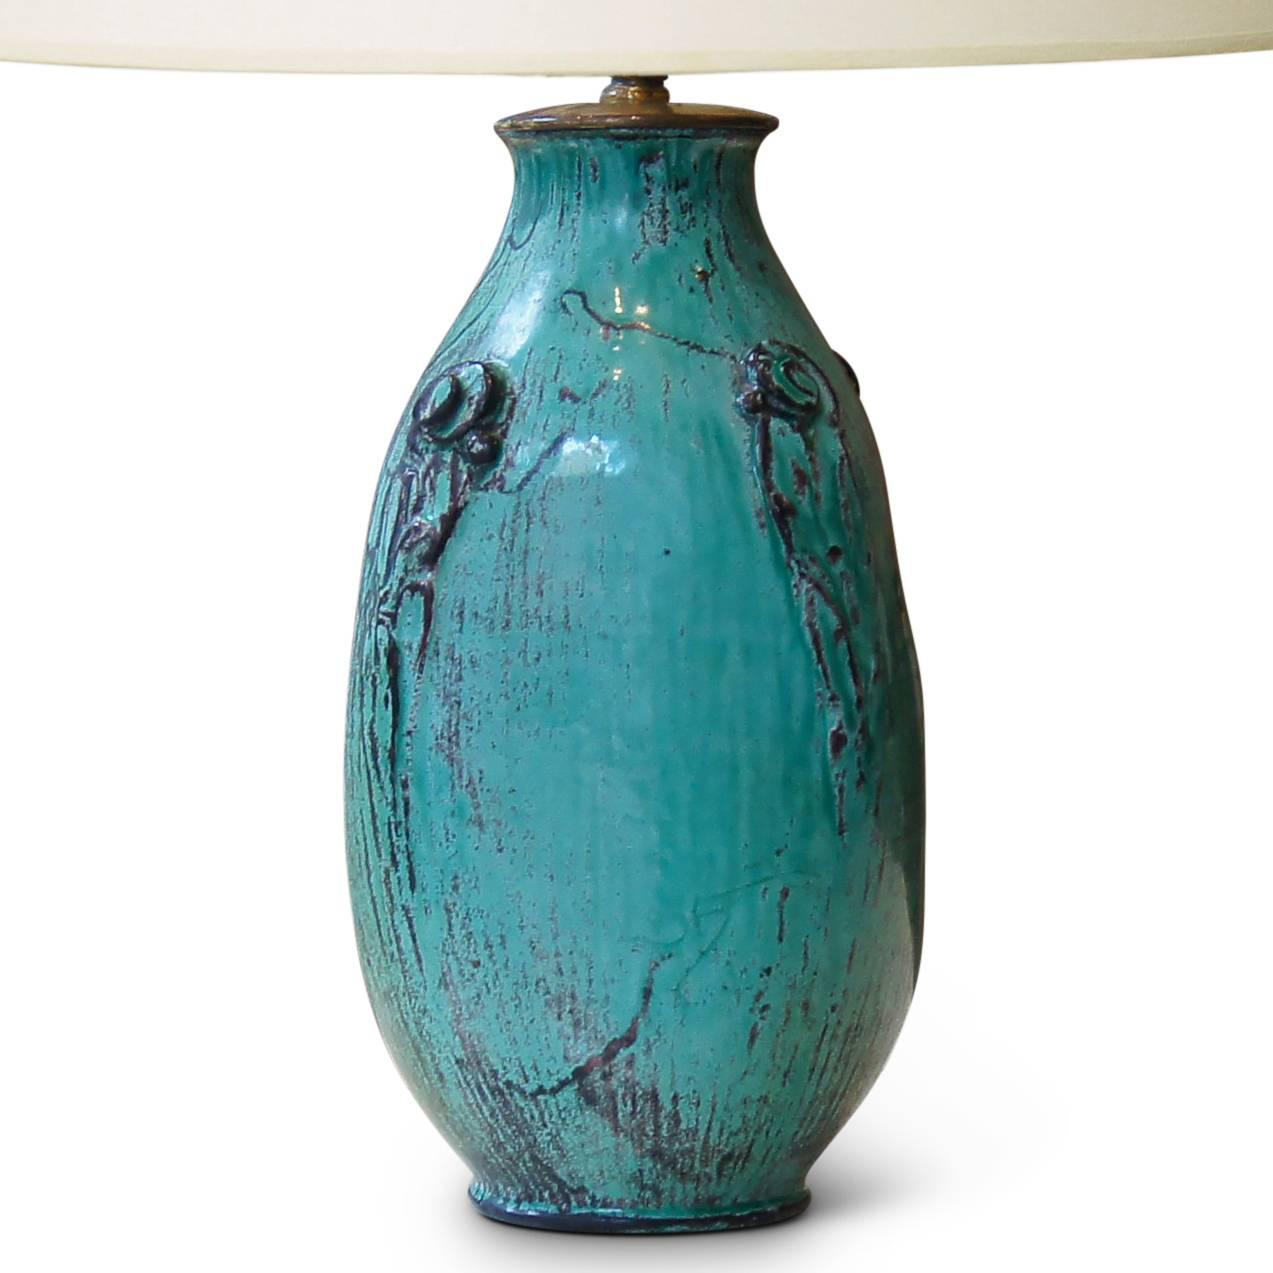 Table lamp by Svend Hammershøi for Kähler, having vase form with four frond motifs emerging at shoulder and carved vertical texturing, hand modeled in earthenware with a teal (veering blue) and gray glaze developed by Jens Thirslund, Denmark,